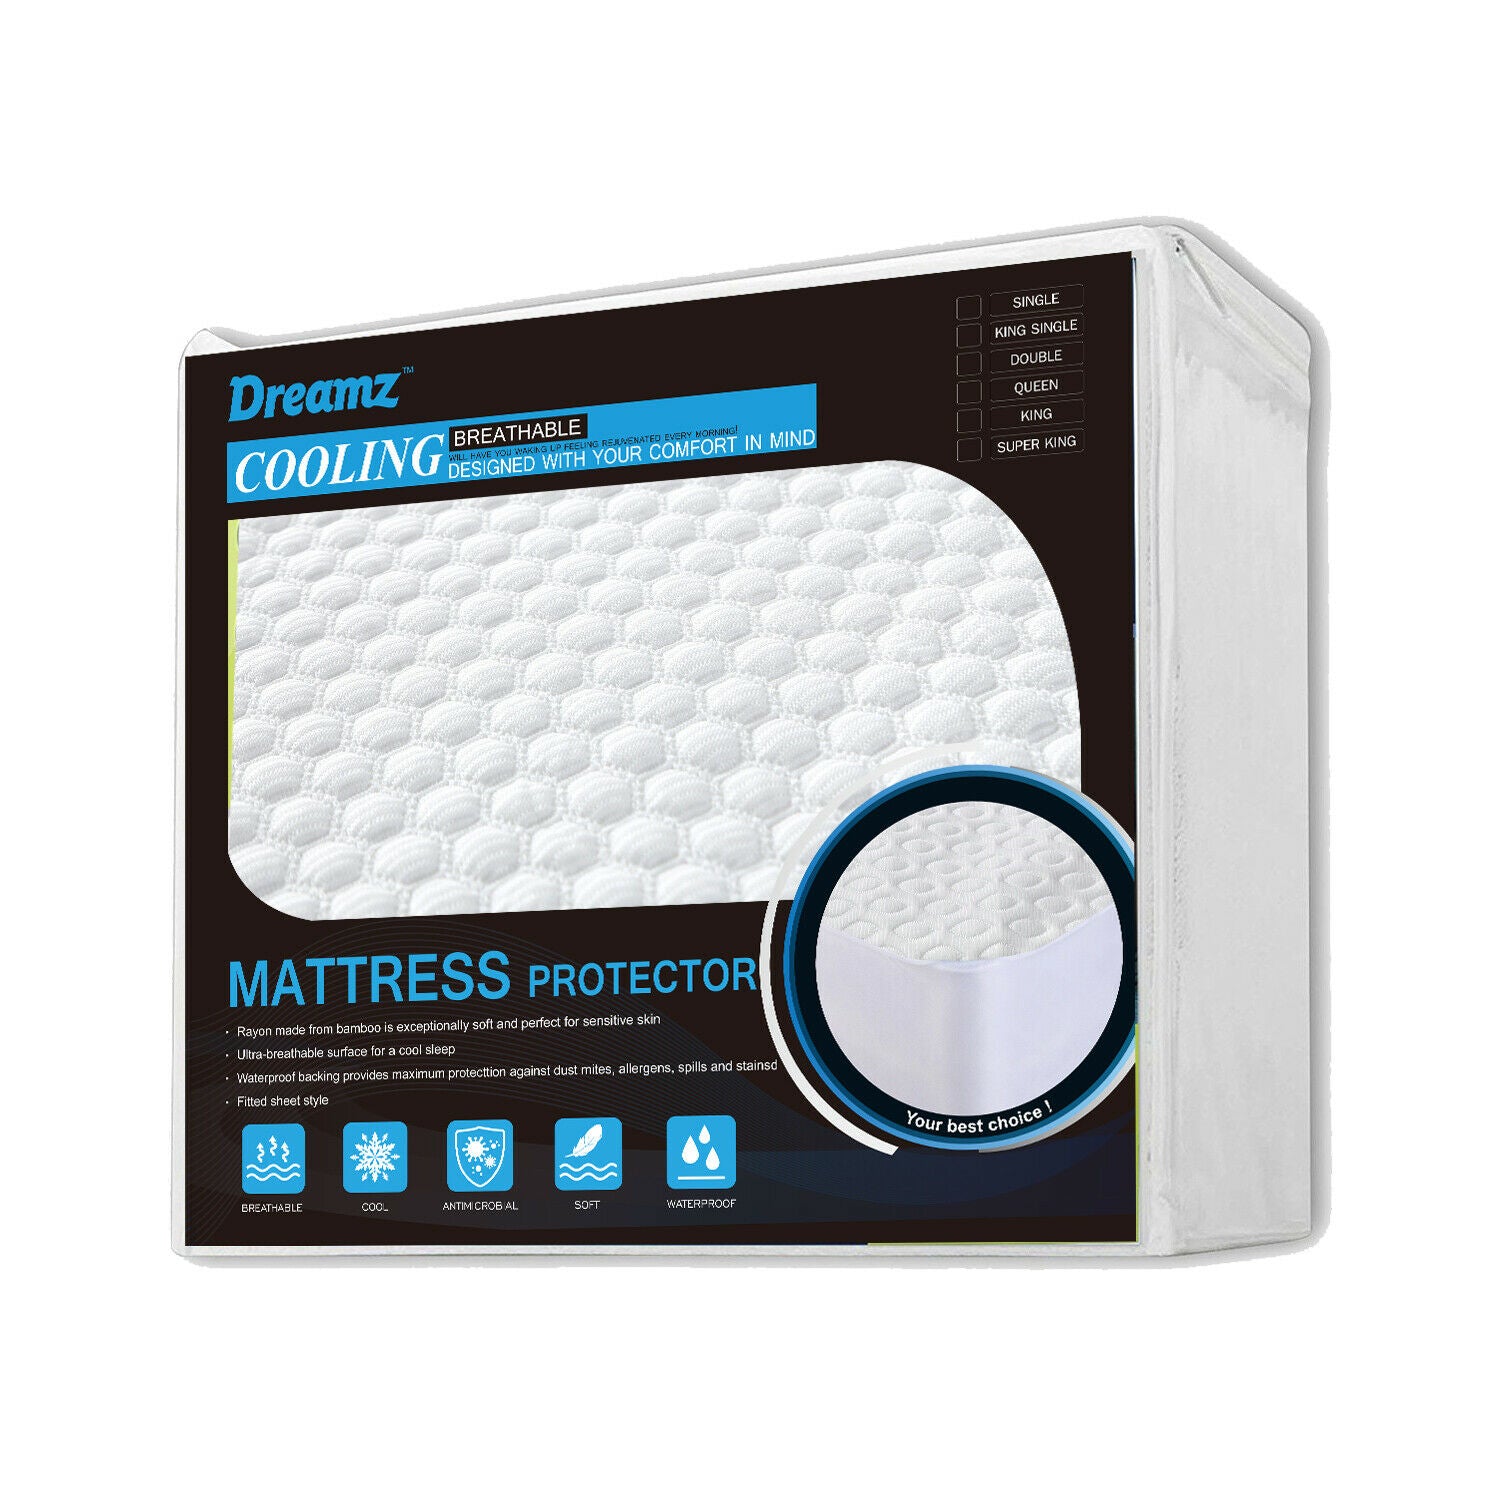 DreamZ Mattress Protector Topper Polyester Cool Fitted Cover Waterproof King - image2